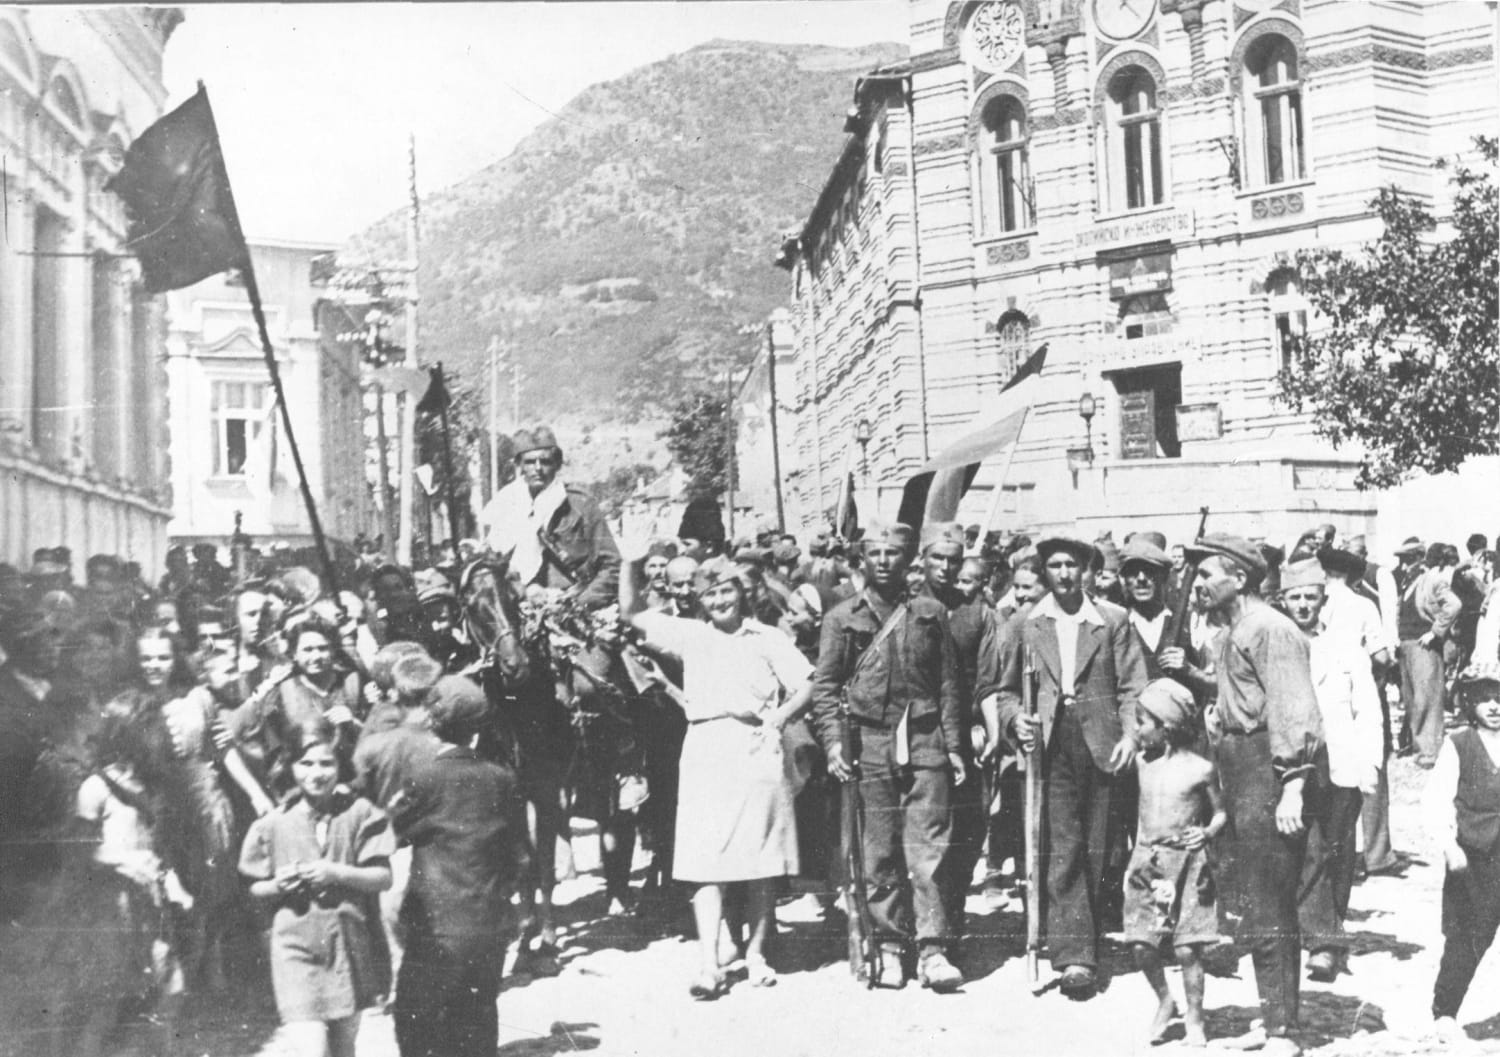 Yugoslav partisans on the streets of Vranje, Serbia after liberating it from Bulgarian occupants, October 11th 1944.